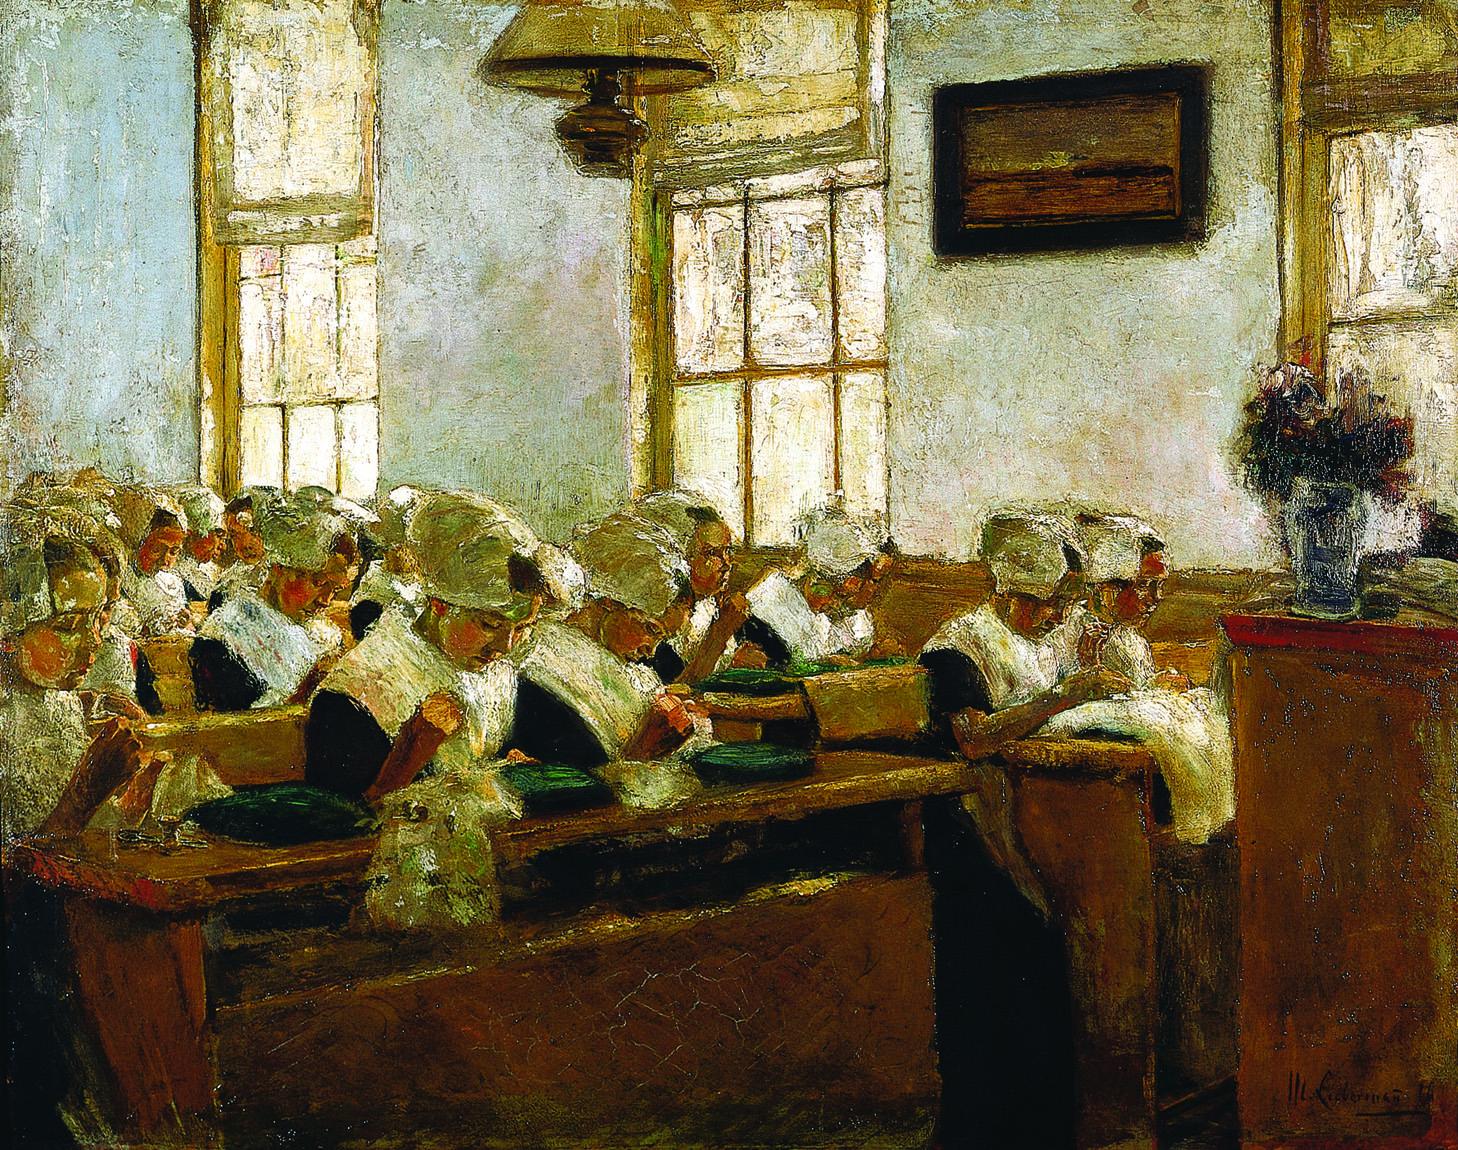 Painting of women seated at rows of desks sewing.